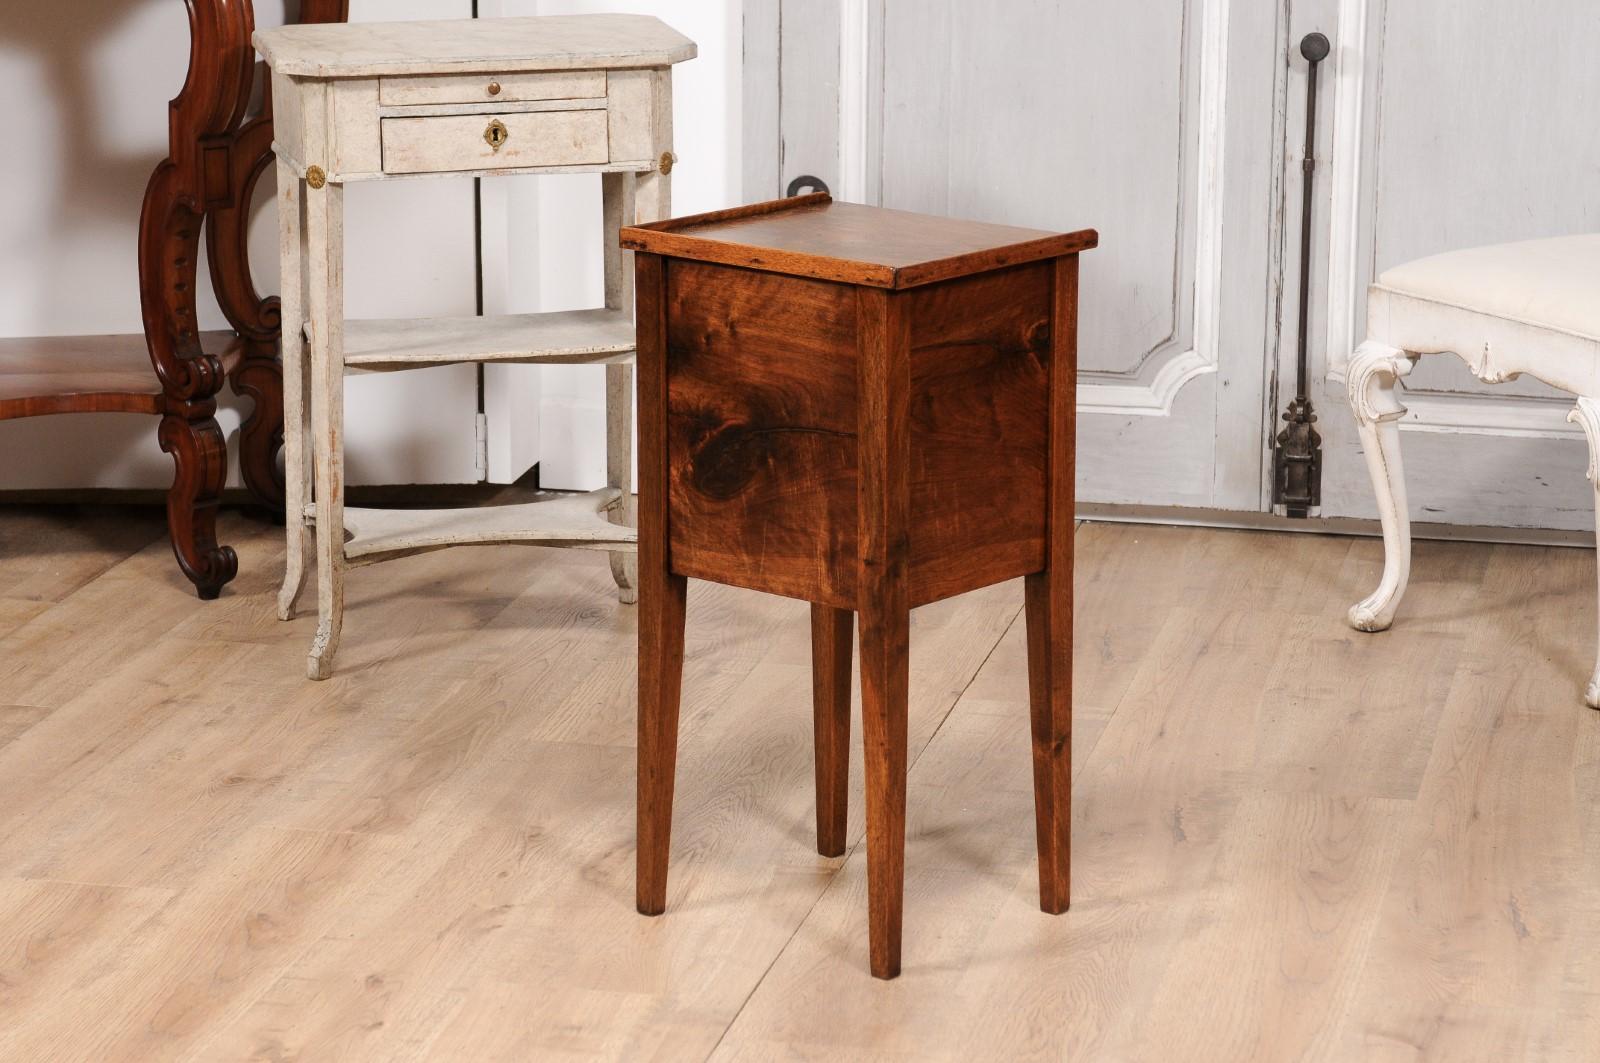 18th Century Italian Walnut Bedside Table with Single Drawer and Tambour Door For Sale 4